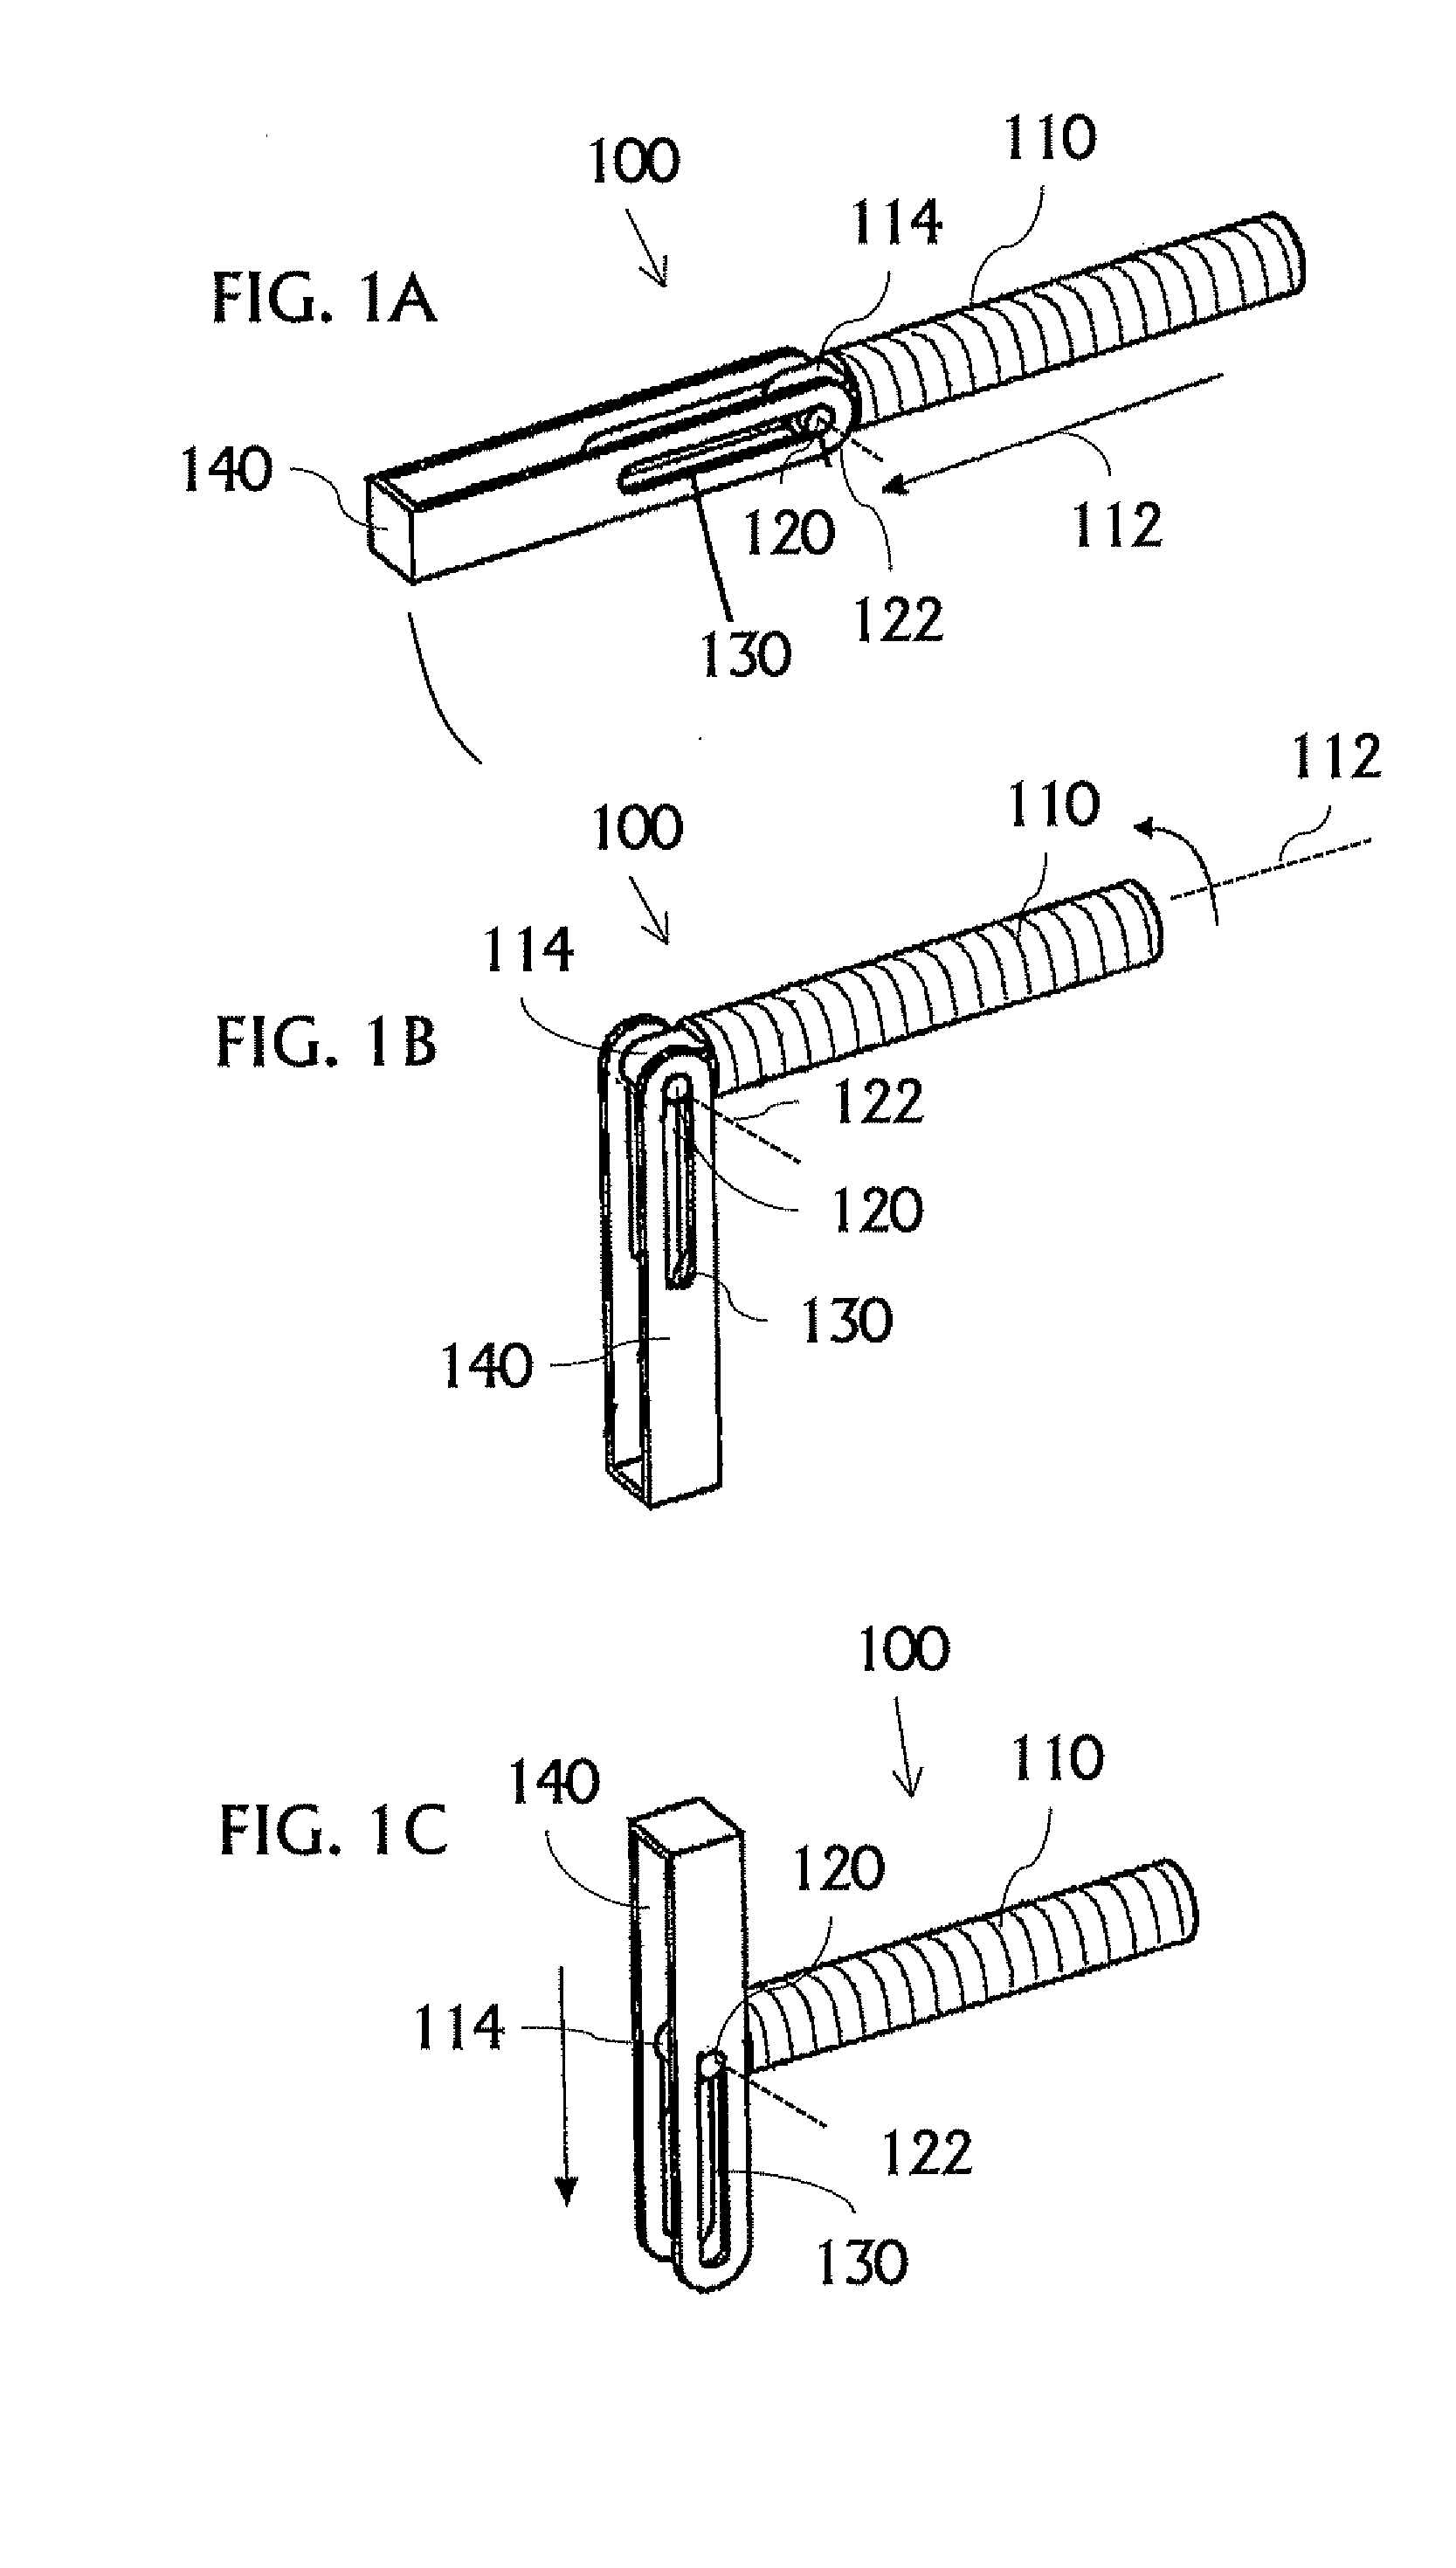 Retrievable toggle bolt with pivot-and-slide engagement